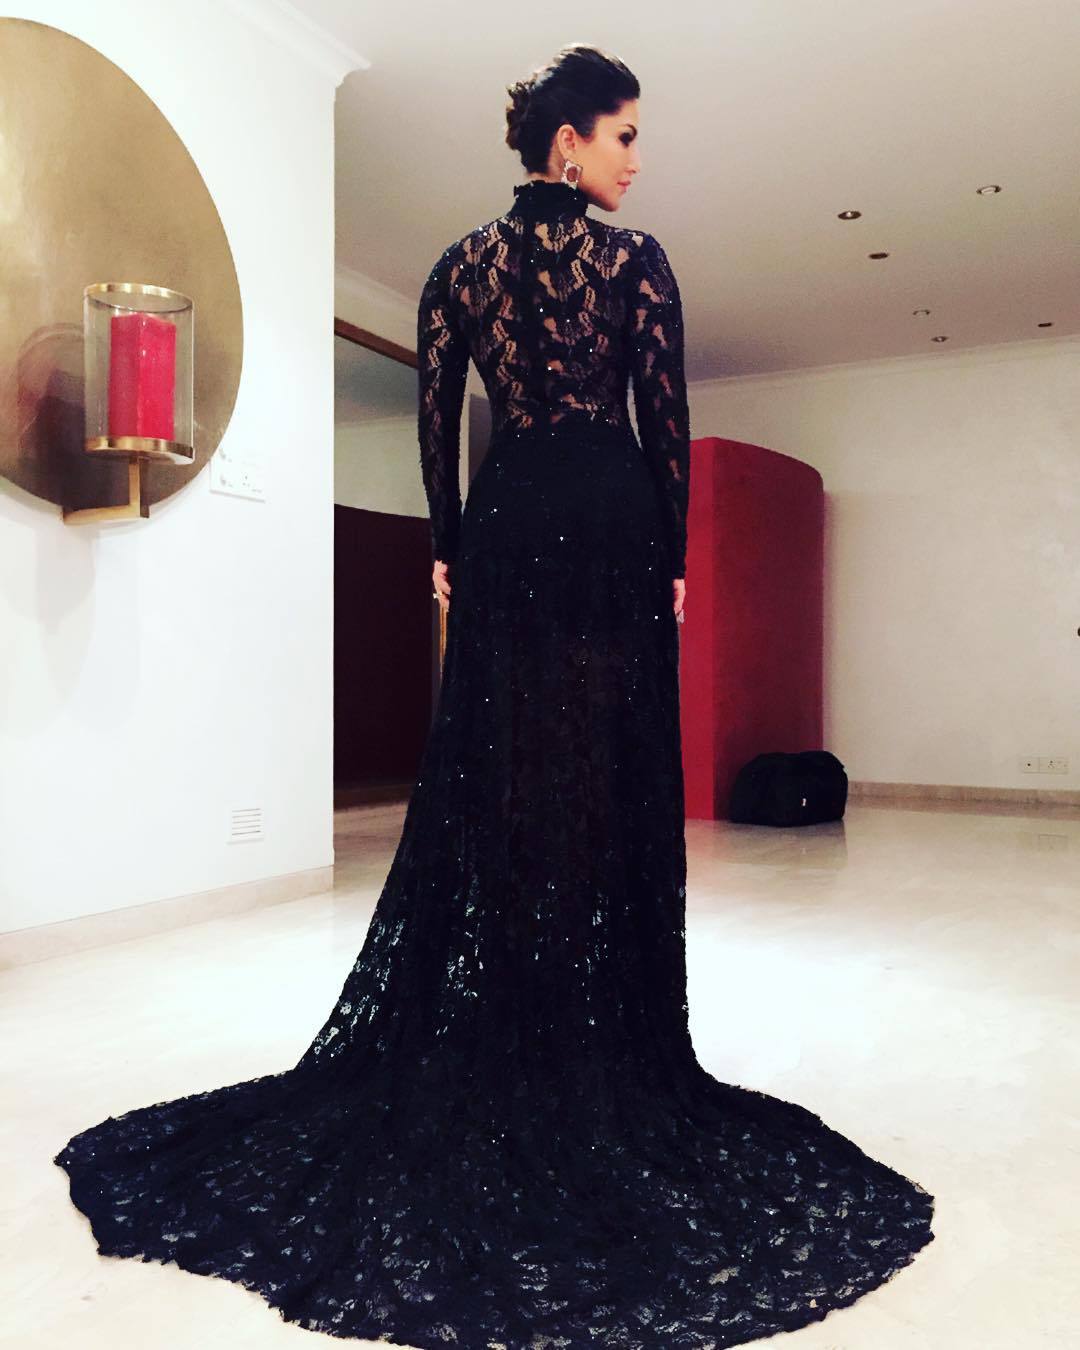 The back of the dress by @rohinigugnani @instagladucame and styled by @hitendra1480